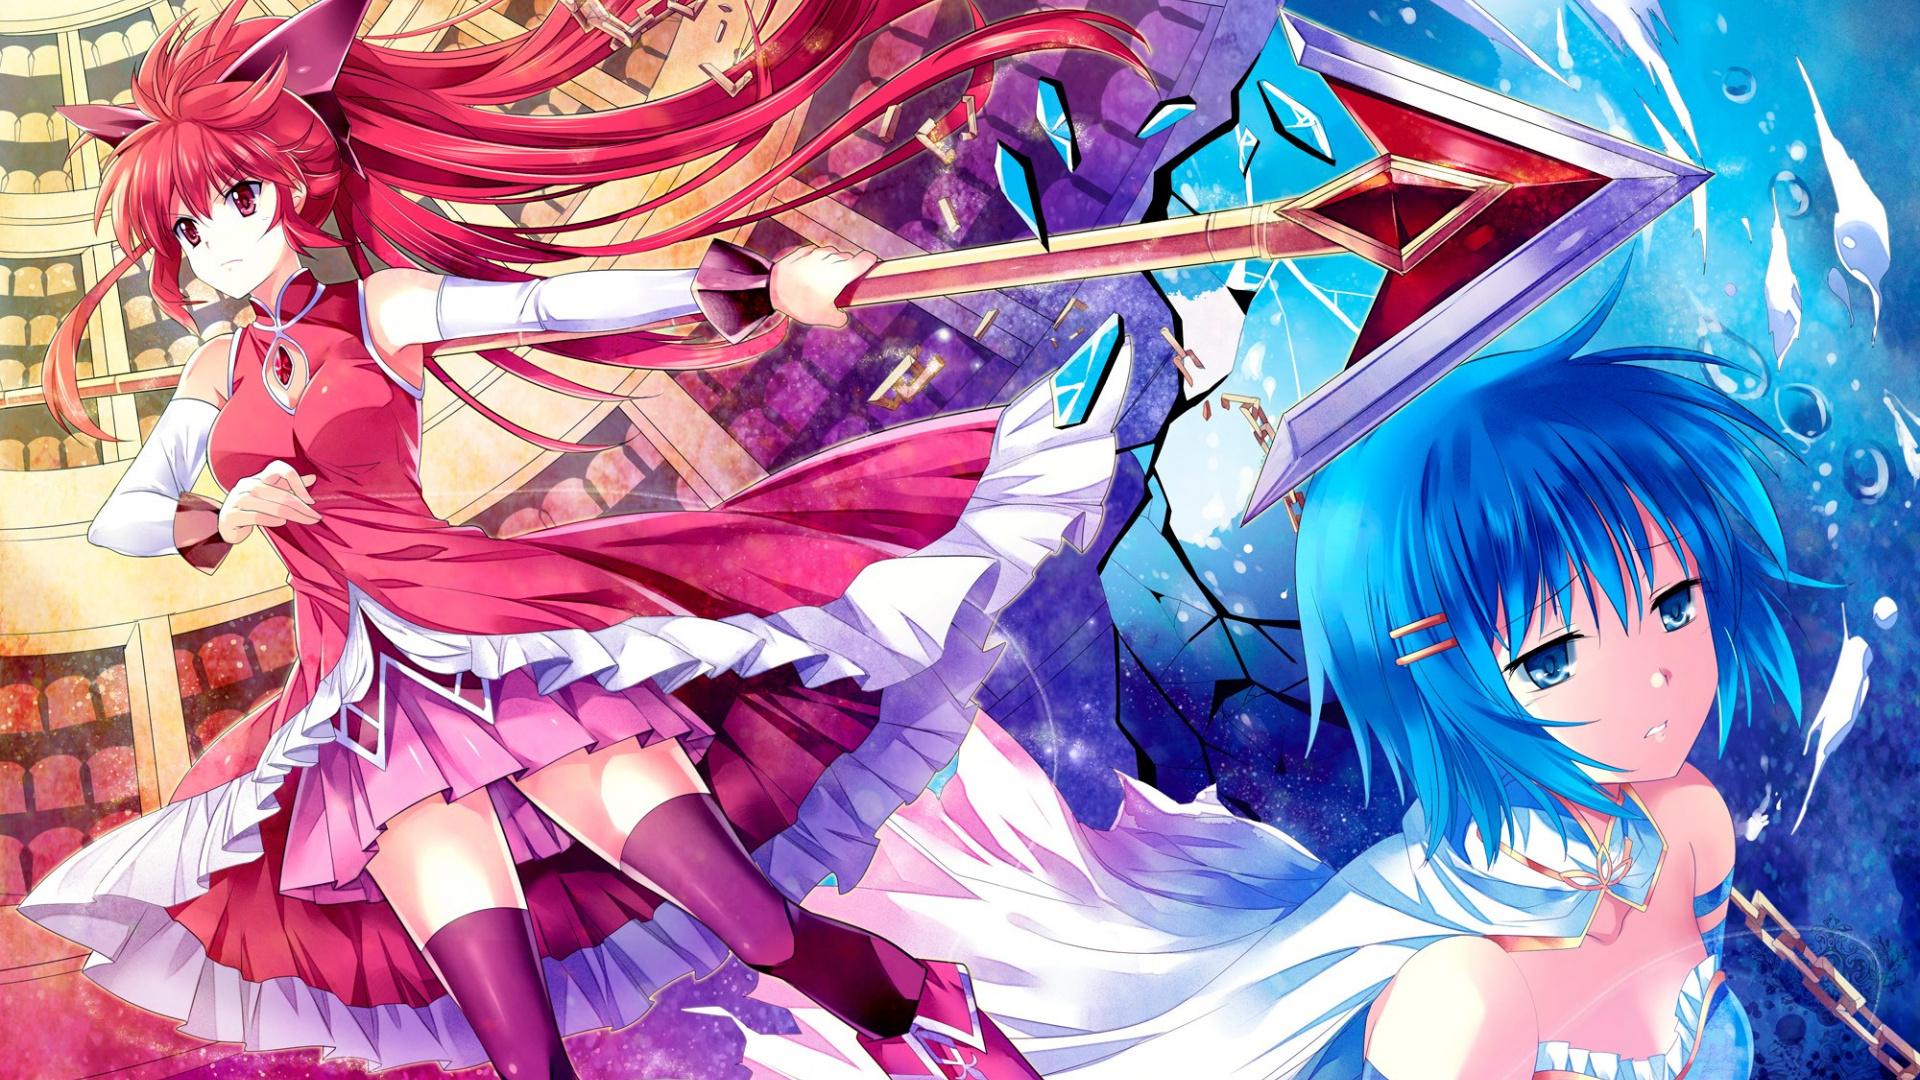 Madoka Magica anime, Red and blue, Anime girls, Desktop pictures, 1920x1080 Full HD Desktop